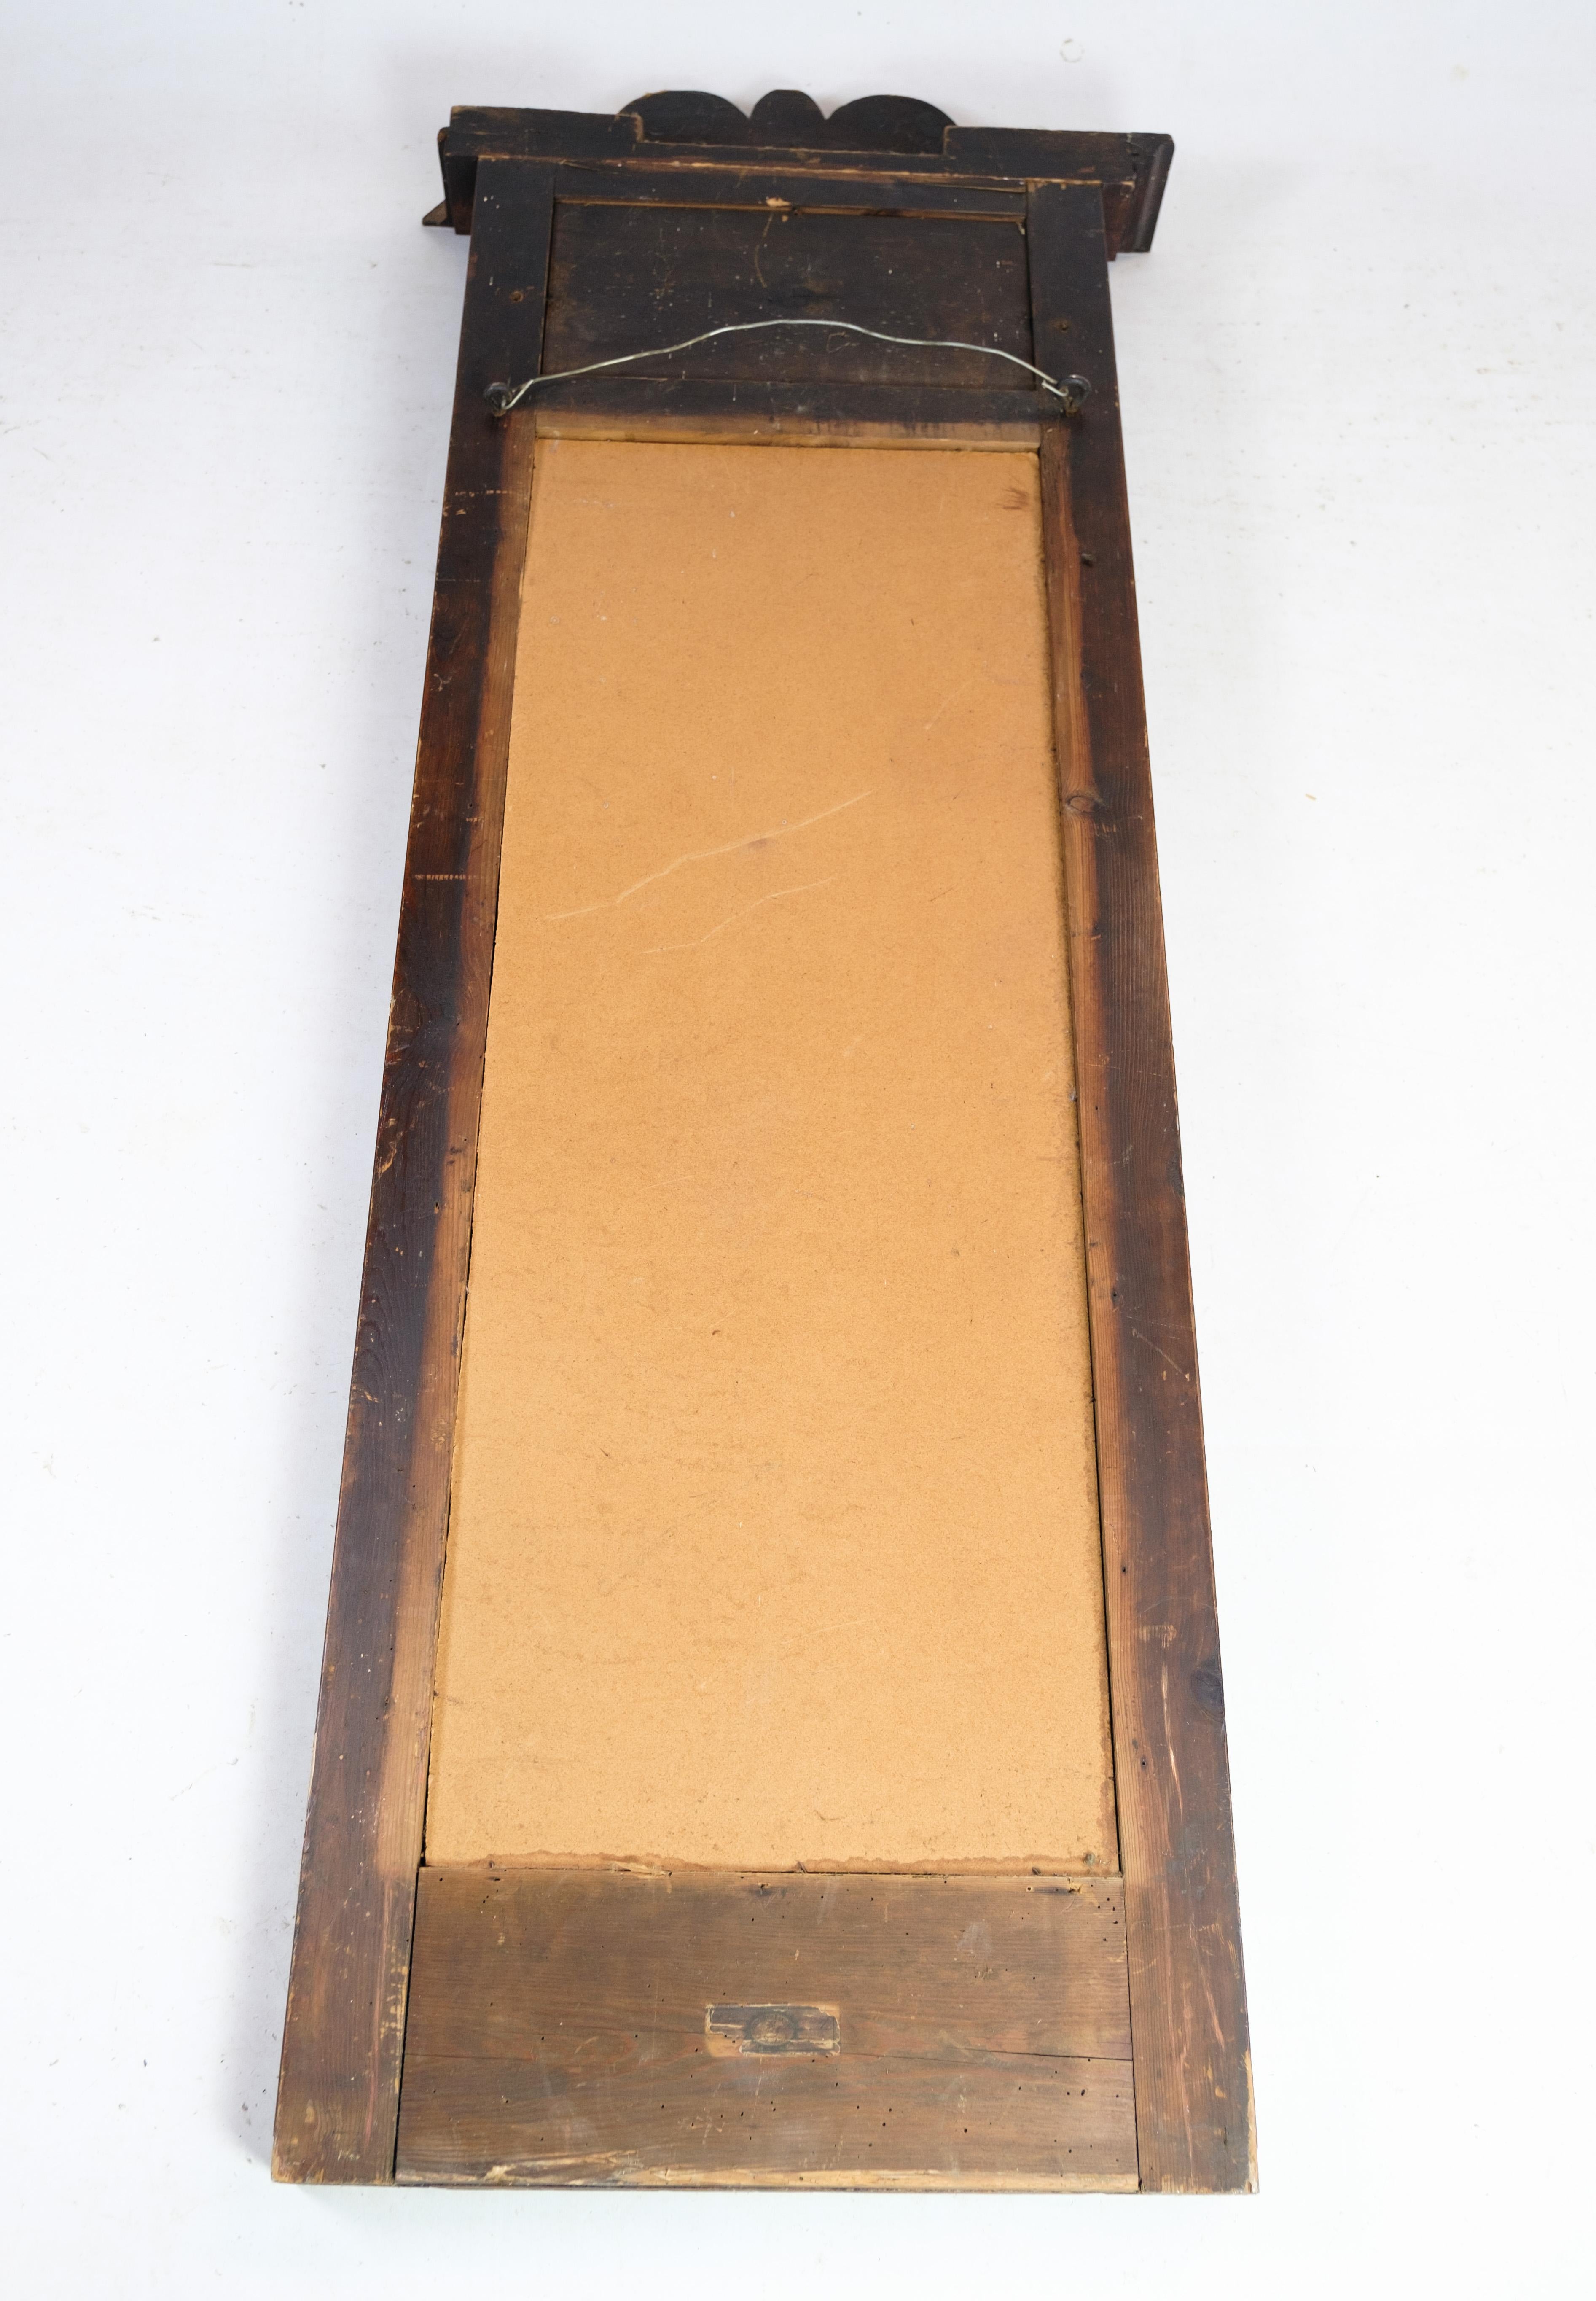 Antique mirror in mahogany from the late Empire period from around the 1840s.
Dimensions in cm: H:160 W:61.